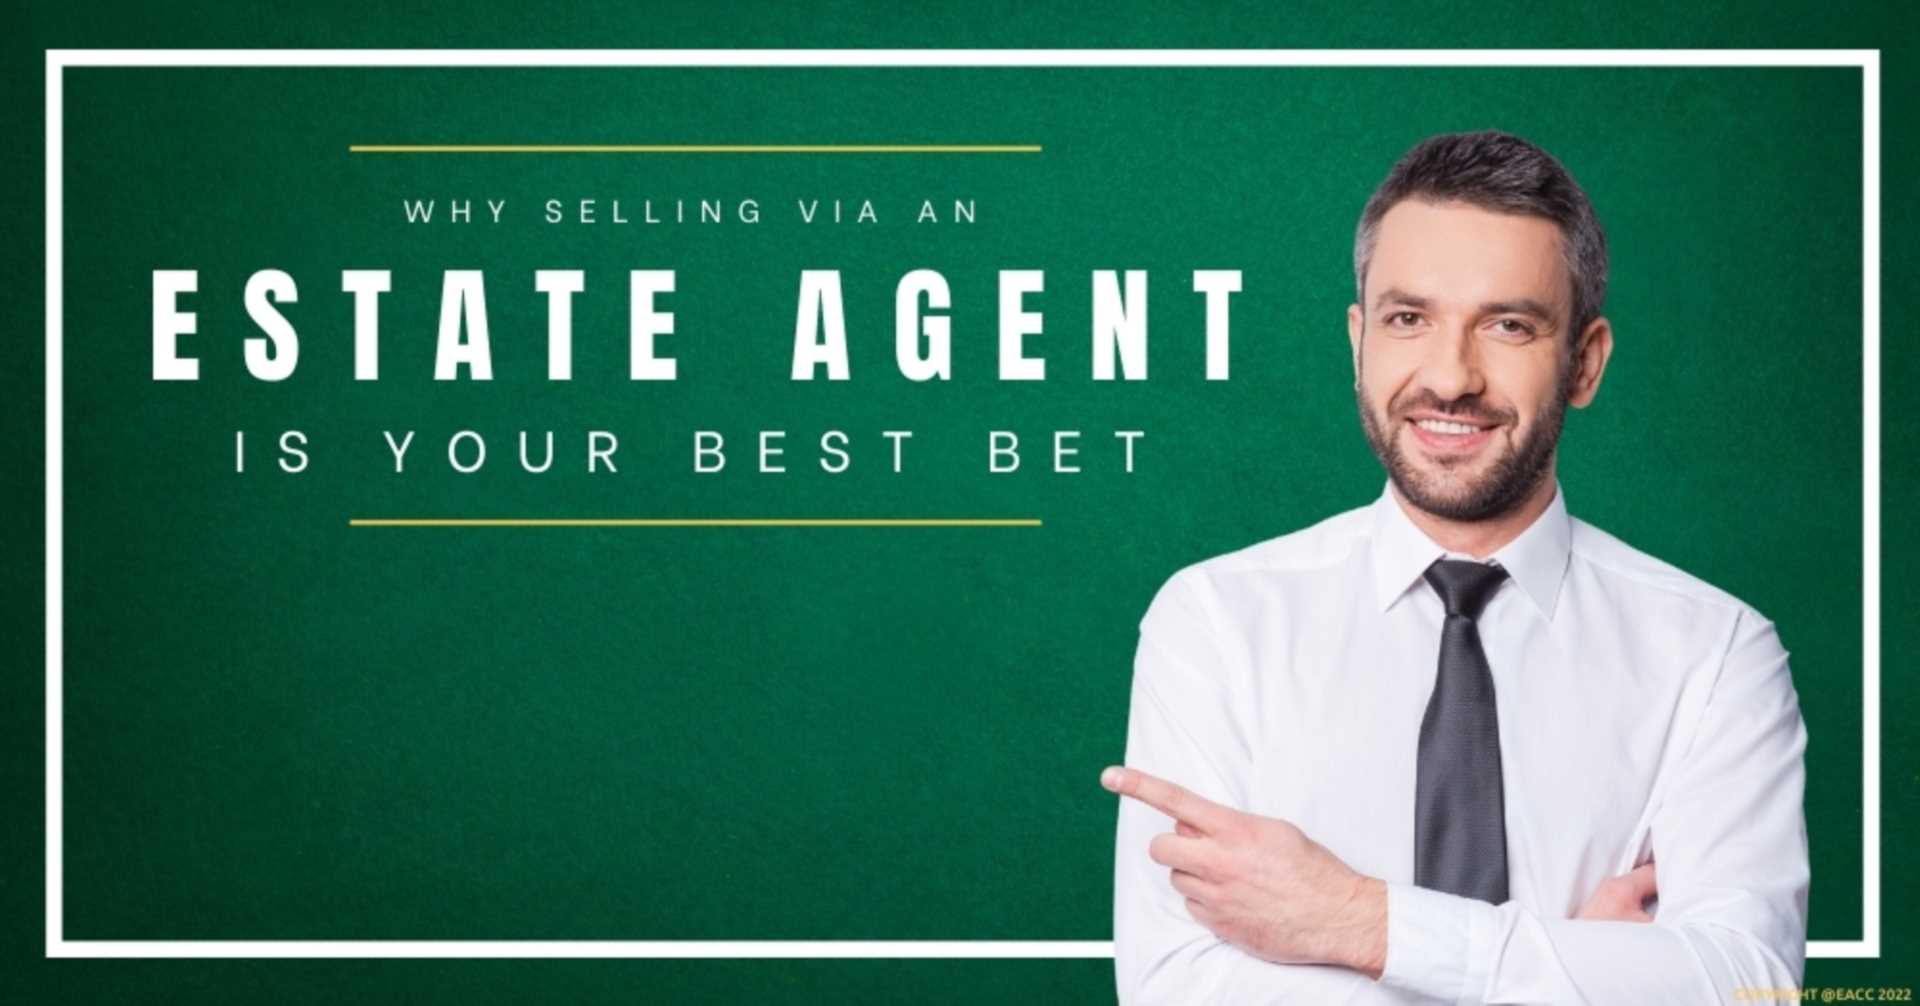 Why Selling Via an Estate Agent is Your Best Bet